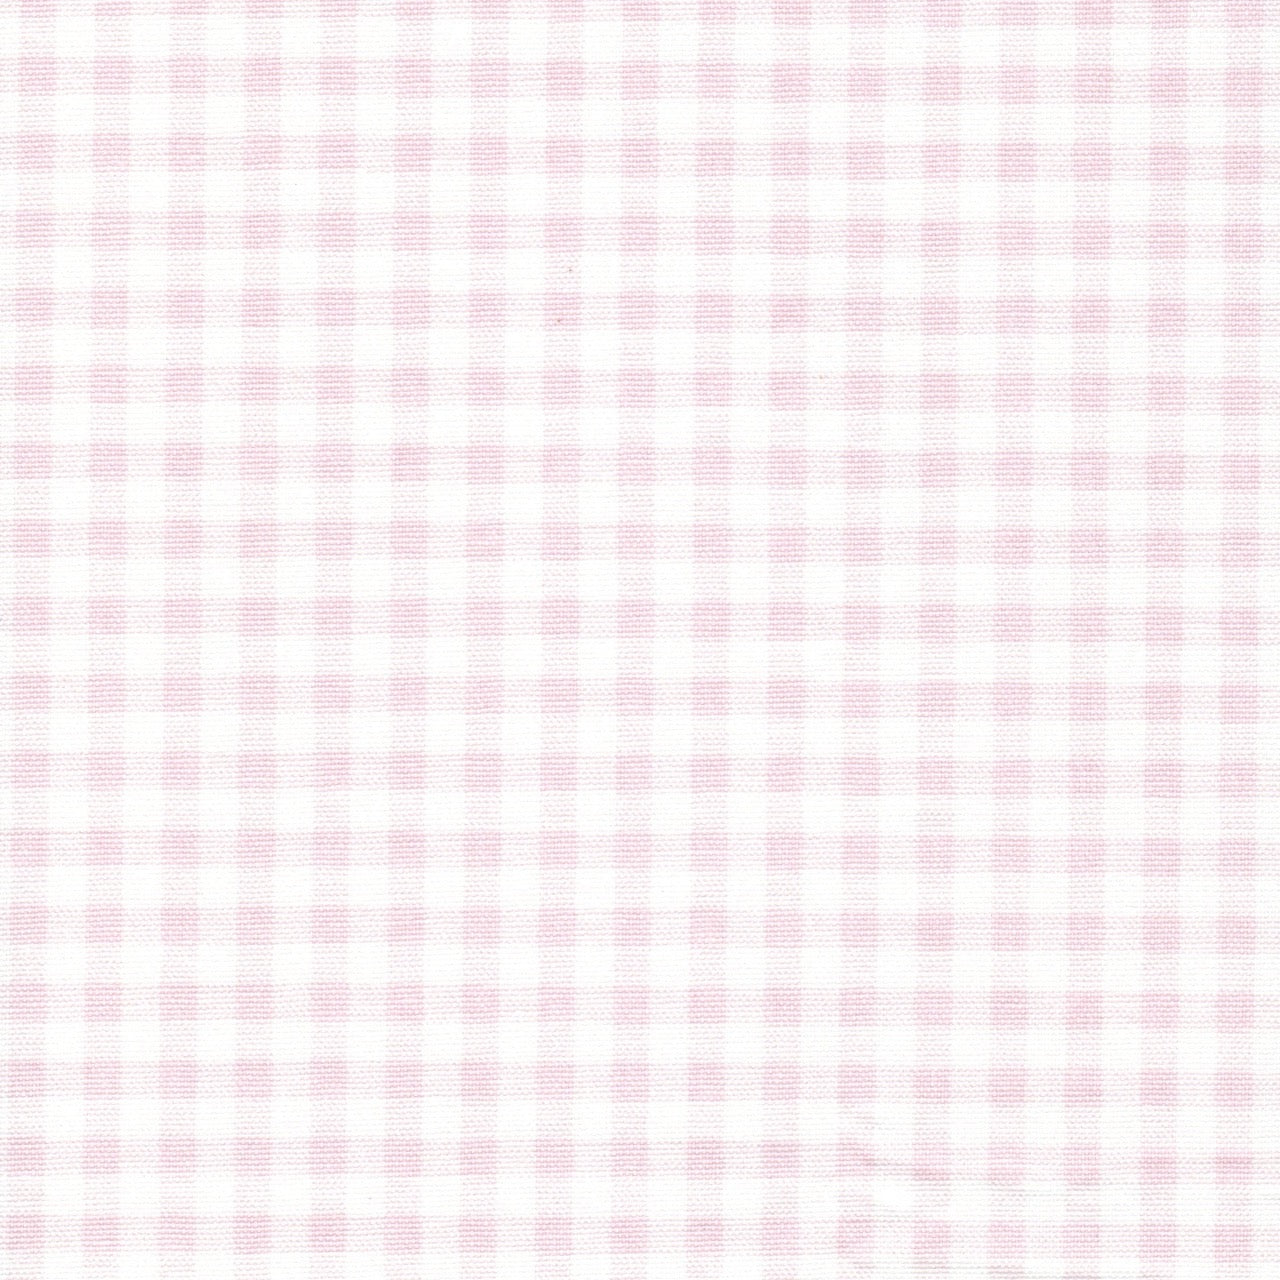 Decorative Pillows in Bella Pink Large Gingham Check on White